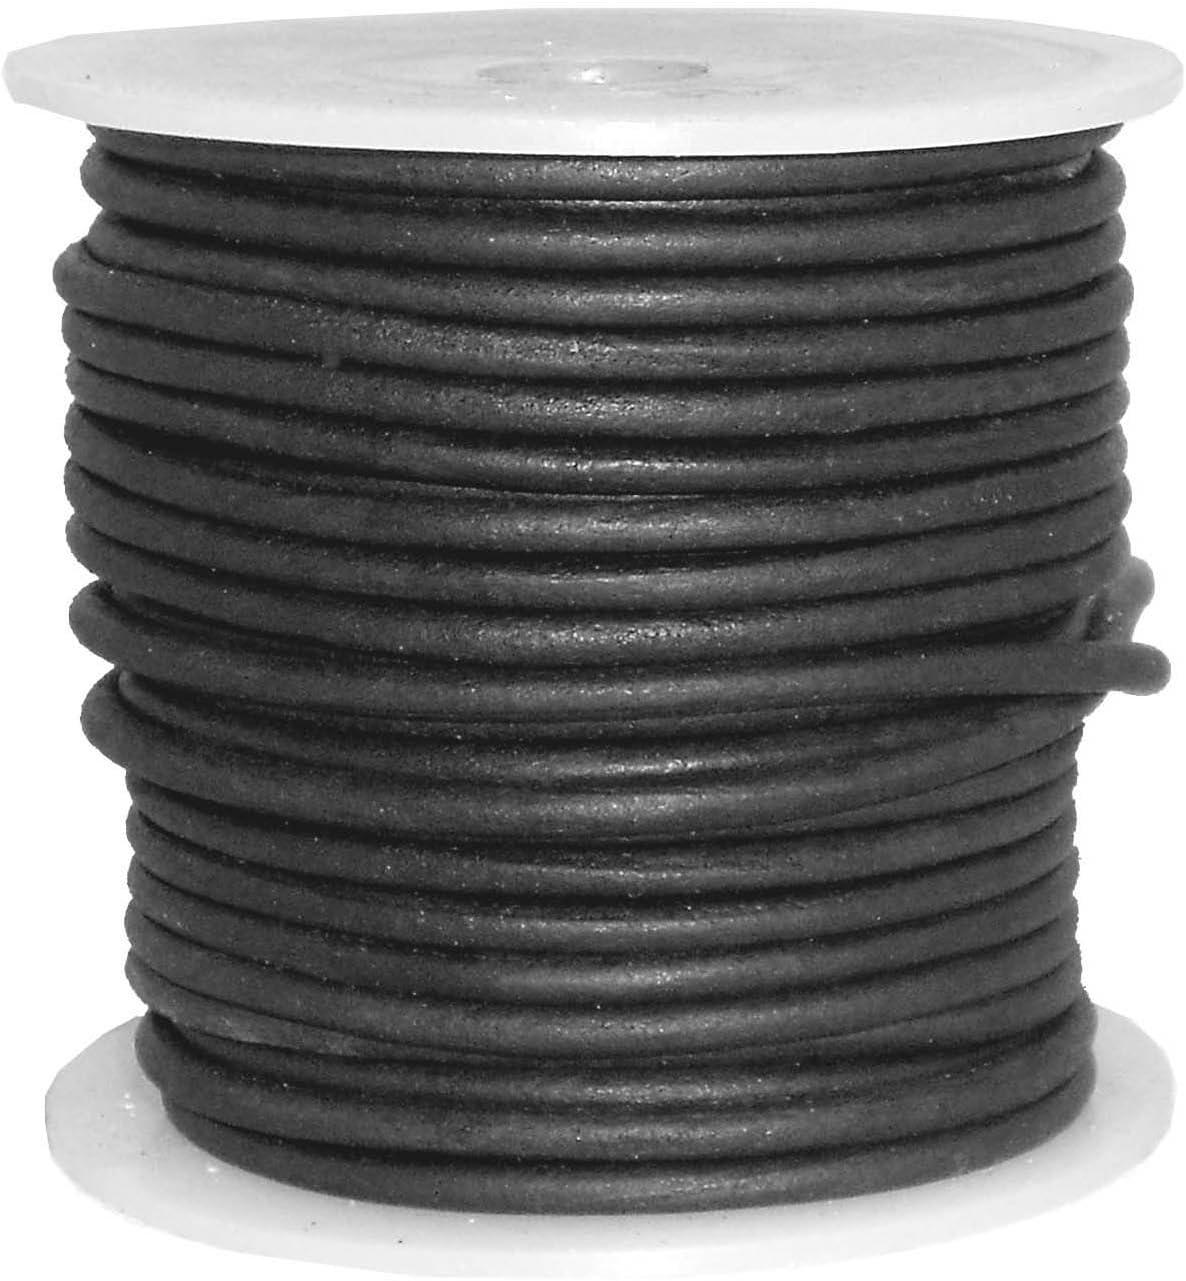 Cords Craft Round Leather Cord 1mm Black Matte for Jewelry Making